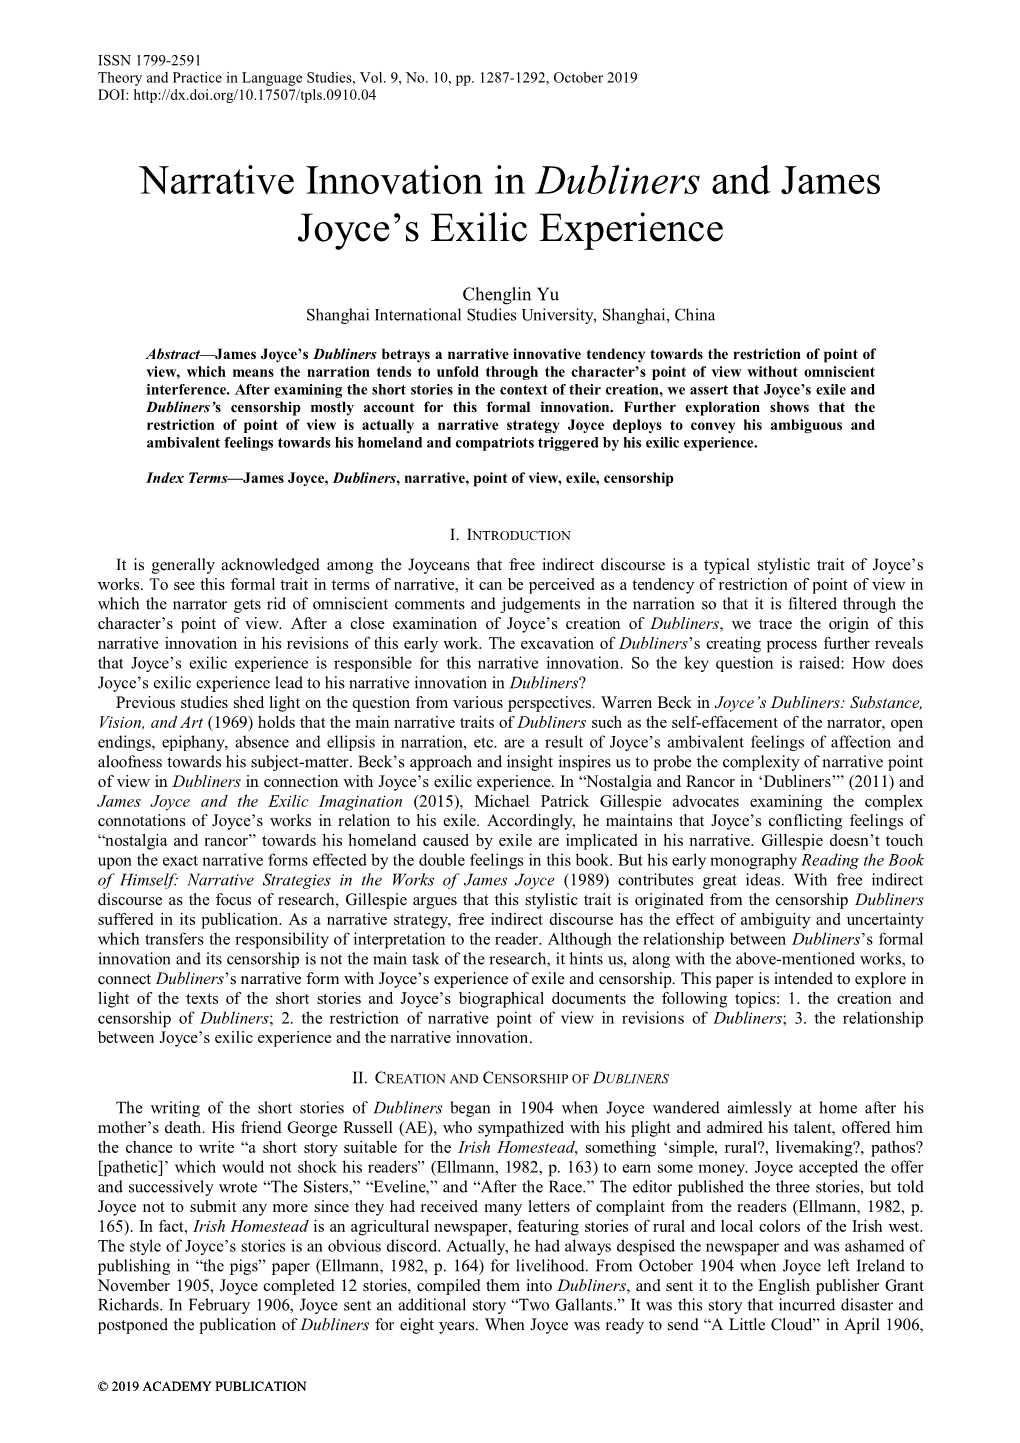 Narrative Innovation in Dubliners and James Joyce's Exilic Experience